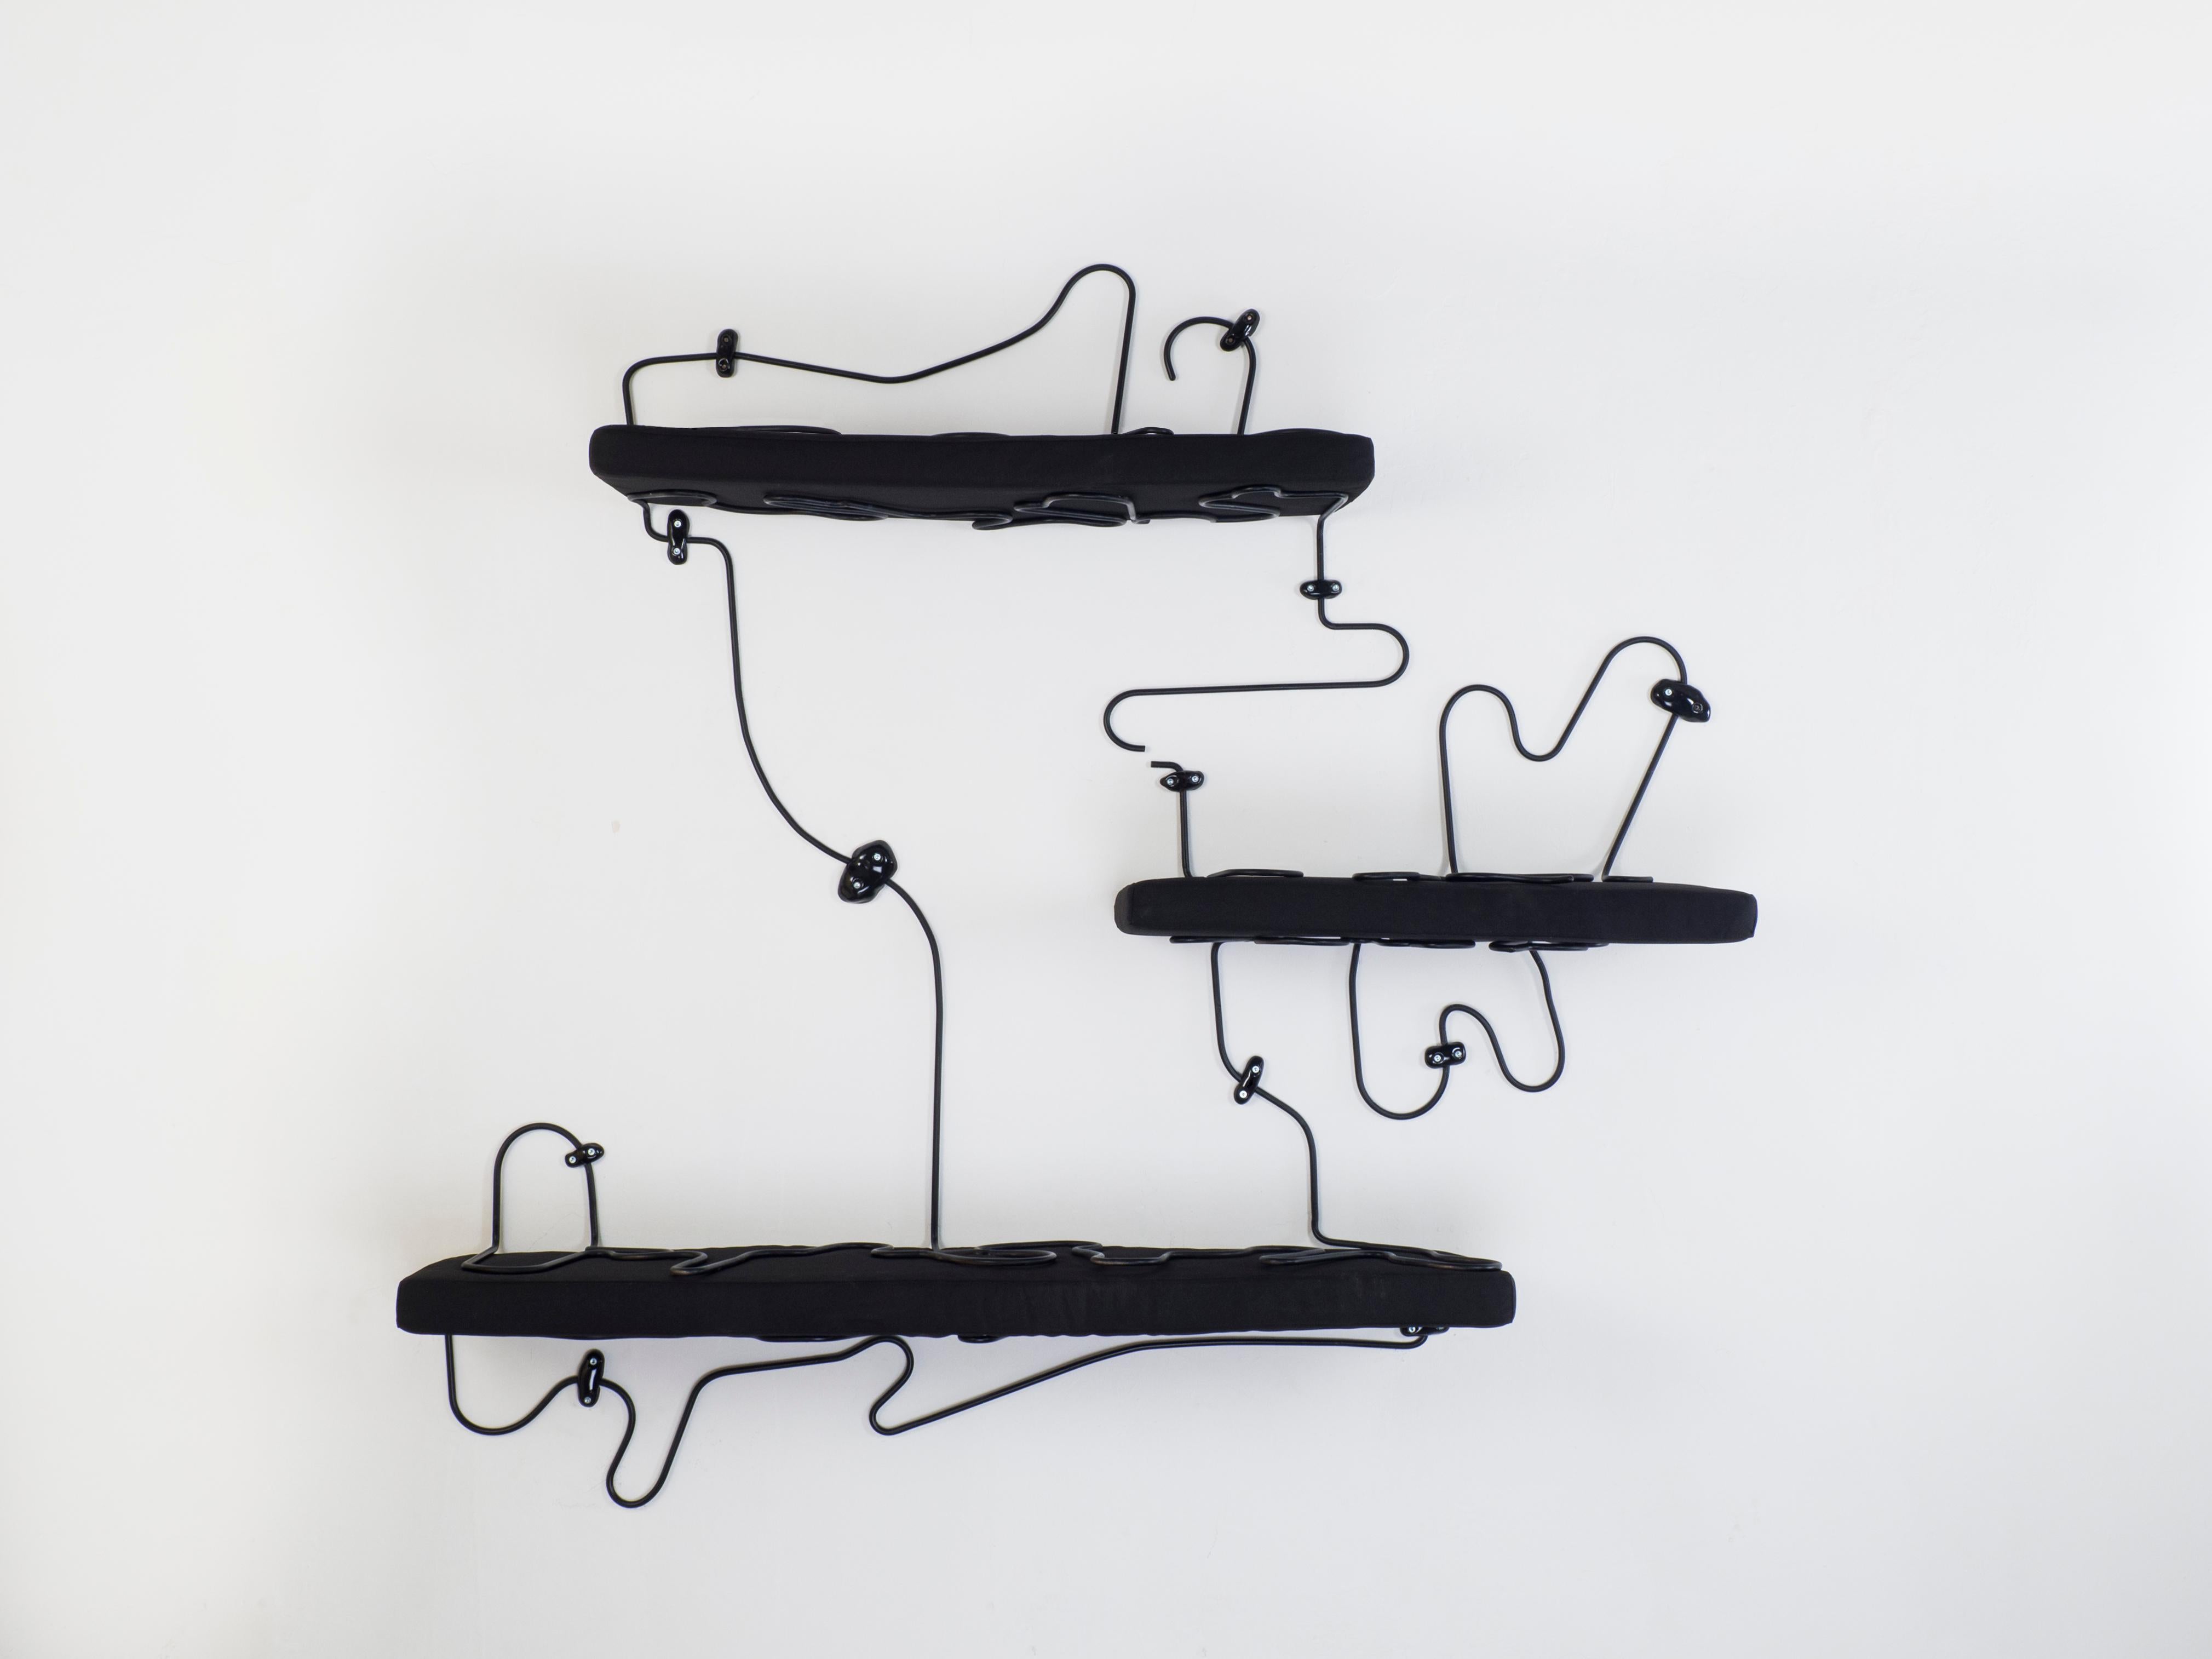 Soft shelves black by Manon Ritaly
Dimensions: 180 x 170 x 30 cm
Materials: Steel, fabric, foam, ceramic


Manon Ritaly, Designer - Visual artist, dreamer exercises her practice in Paris where she explores new ways of interacting with objects